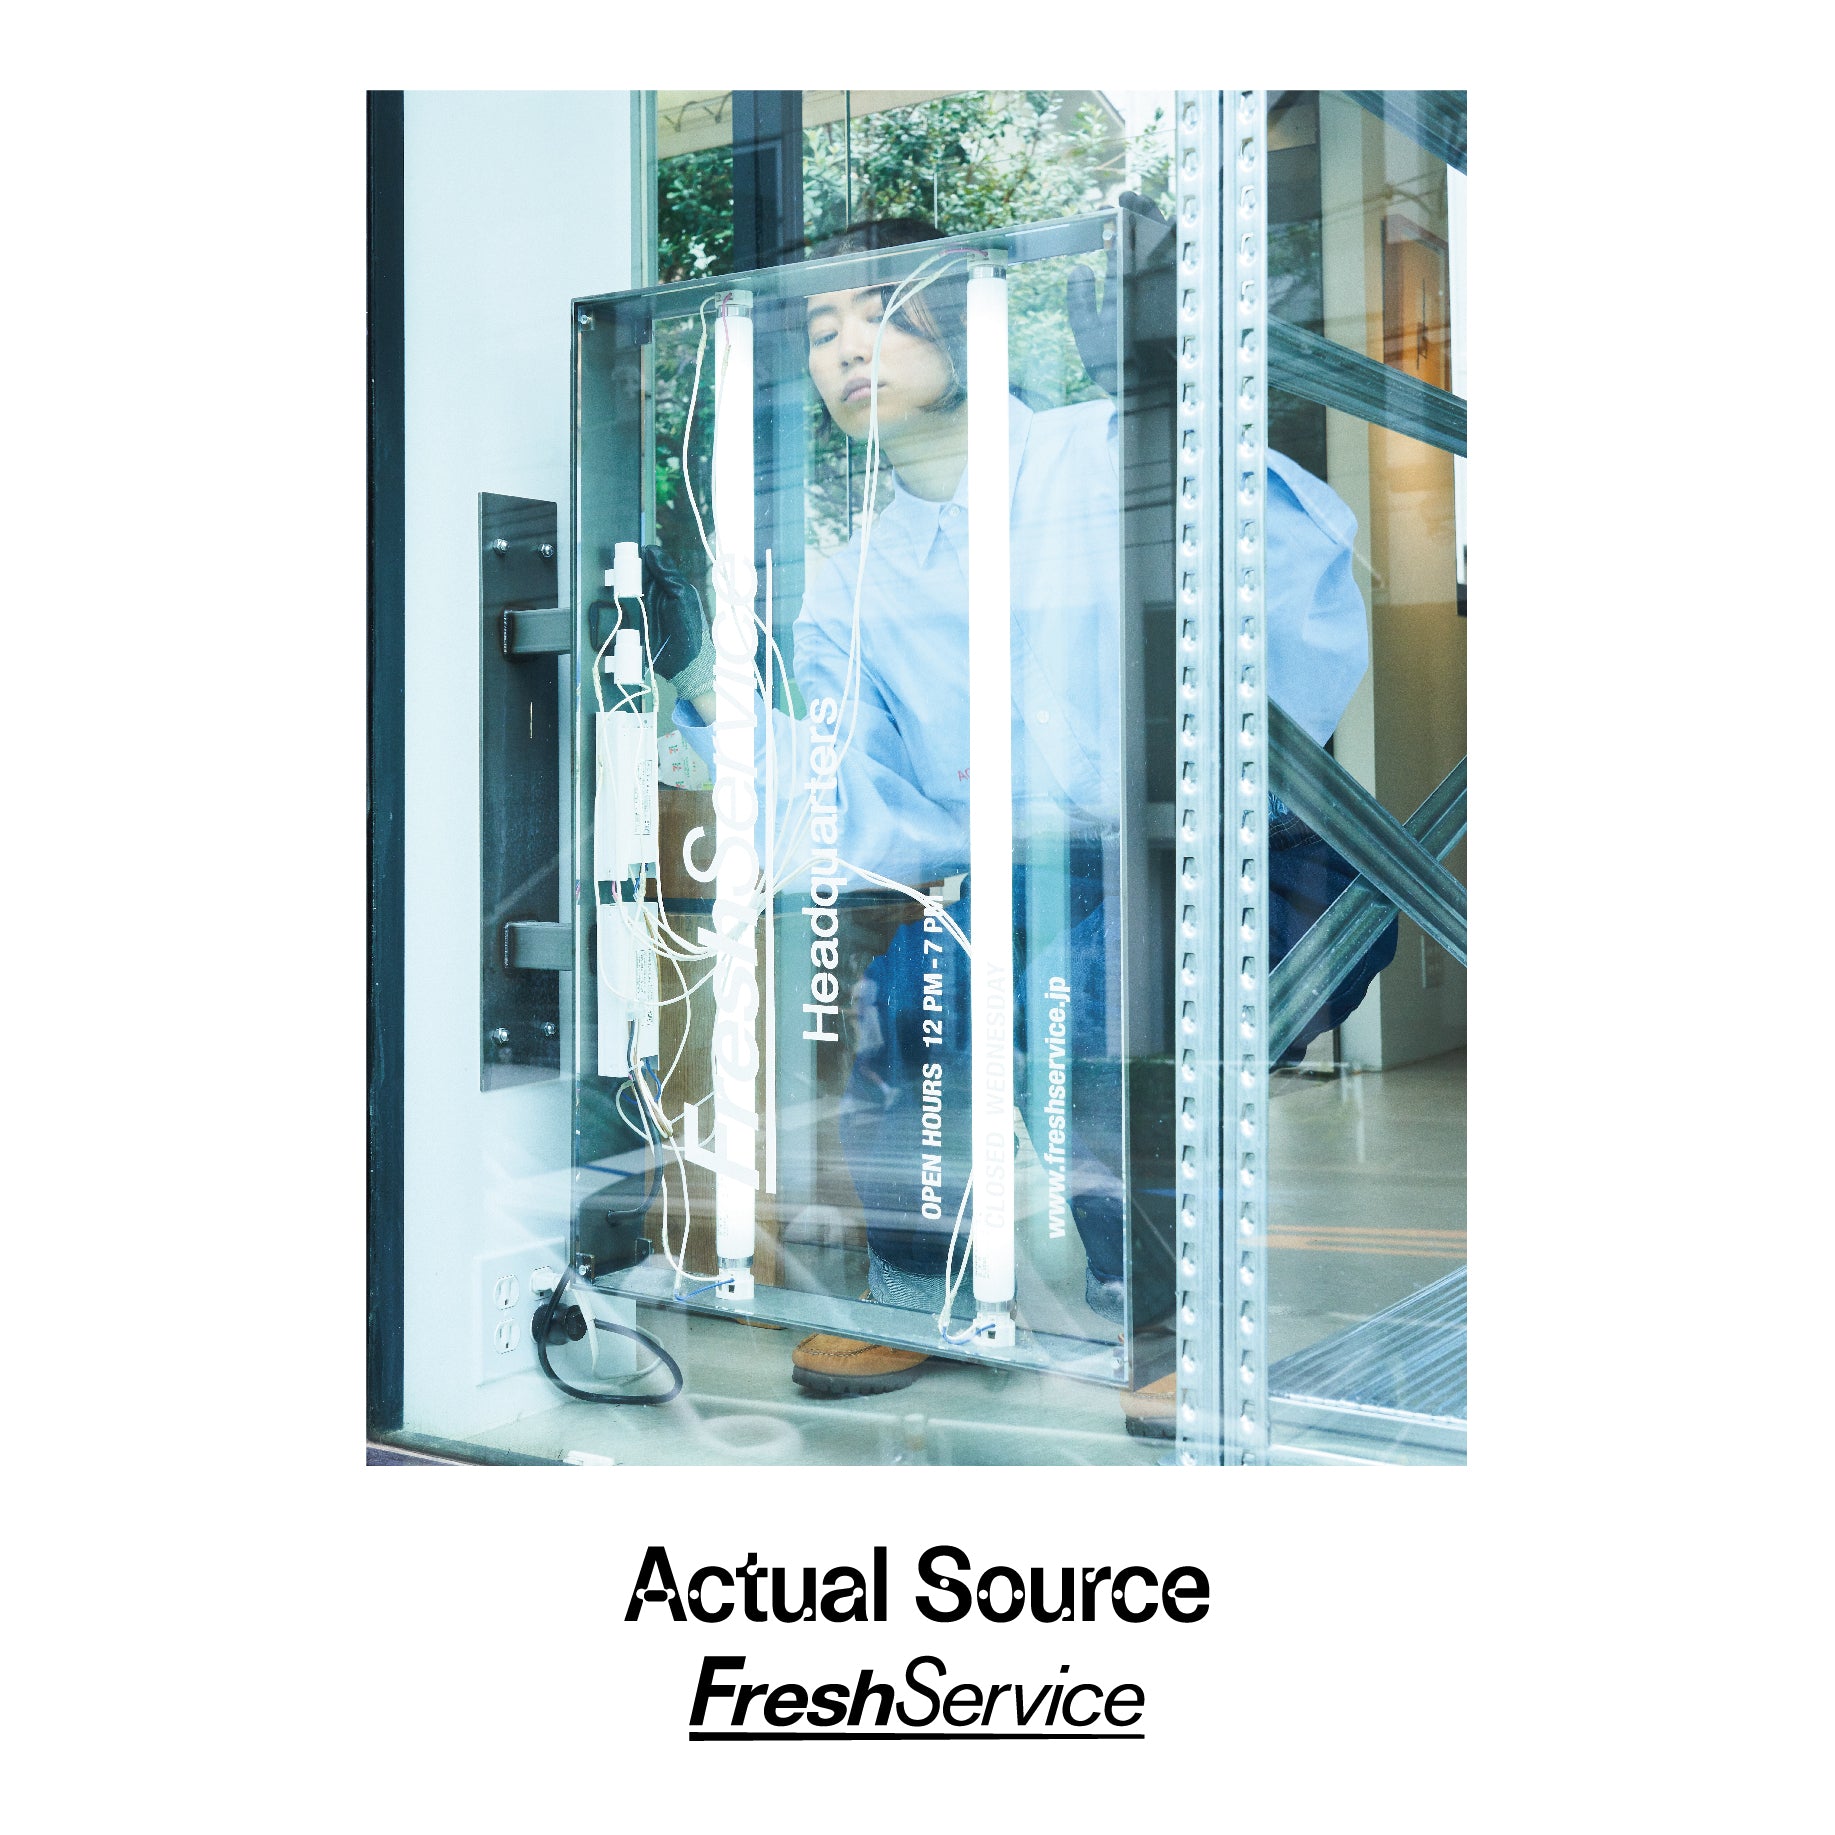 Actual Source×FreshService 発売のお知らせ – FreshService® official